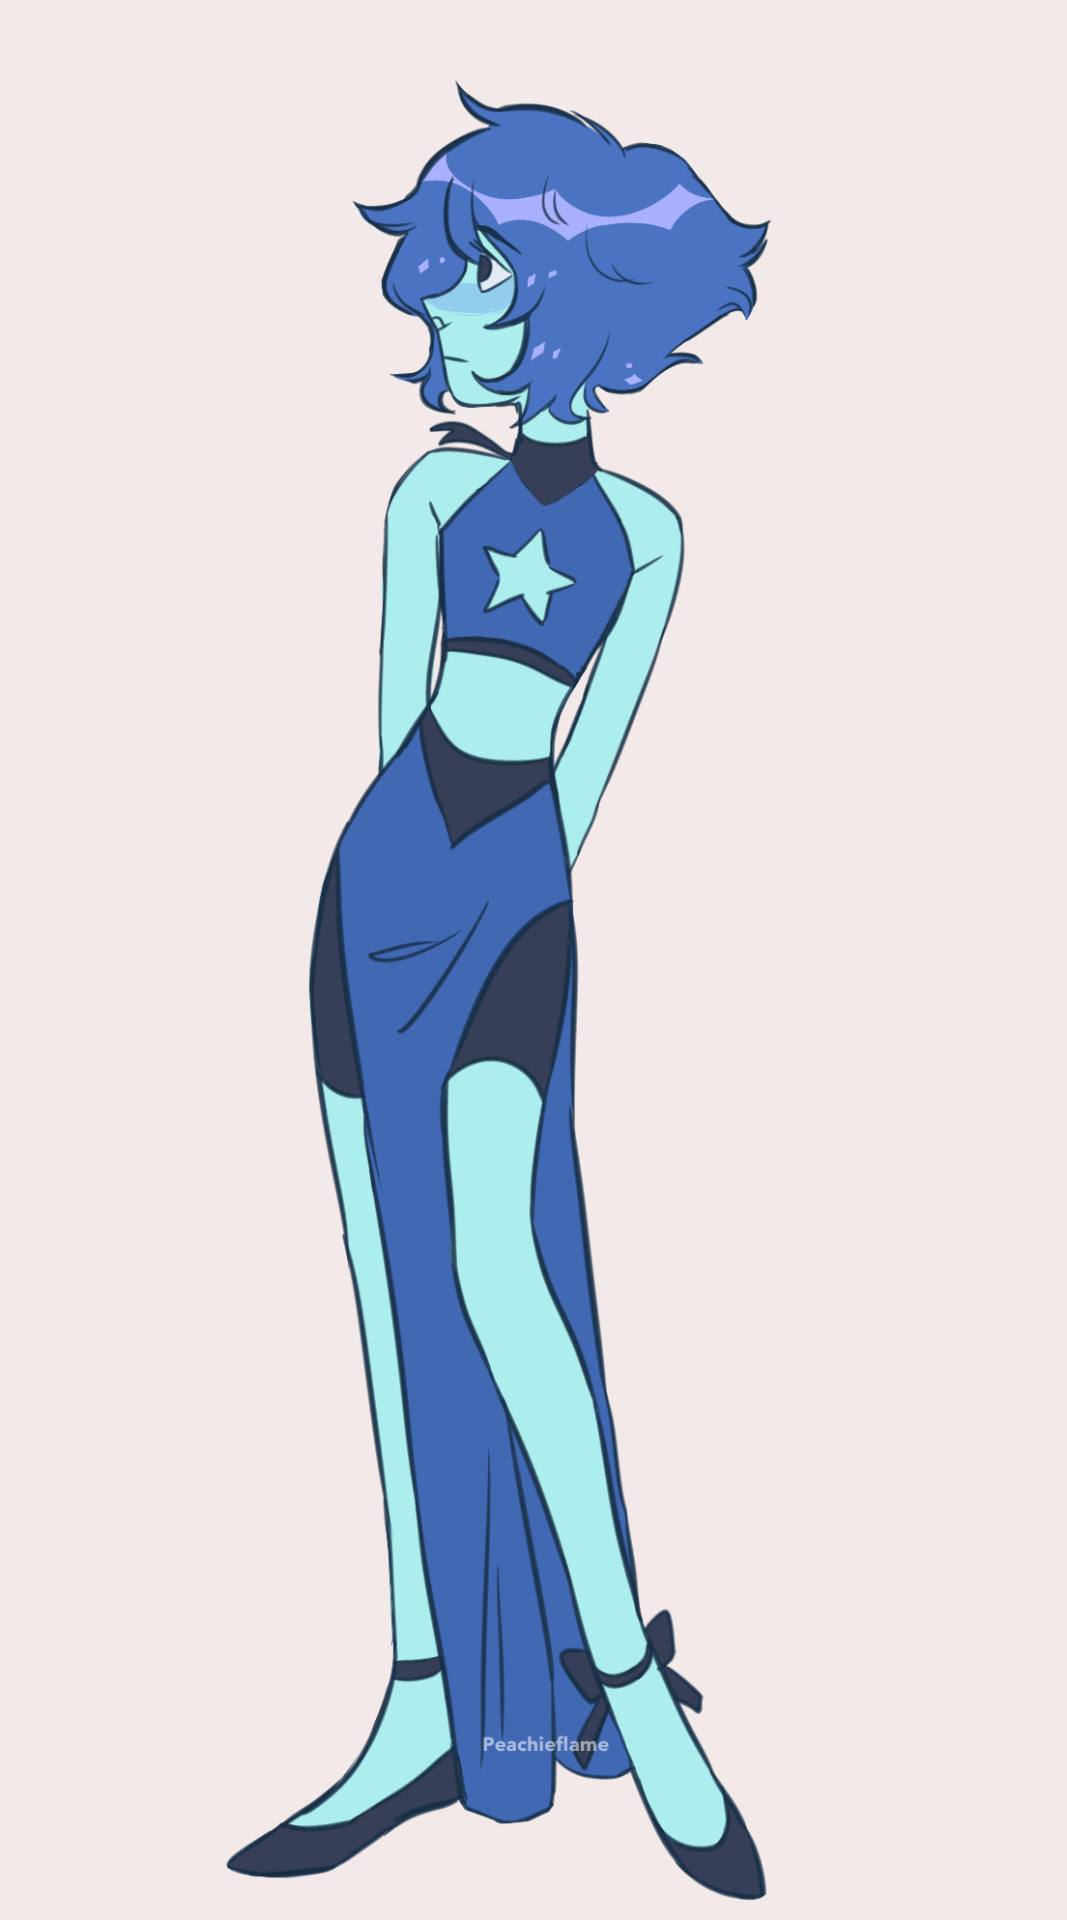 Waiting to see Lapis’s crystal gem outfit is the one thing keeping me alive